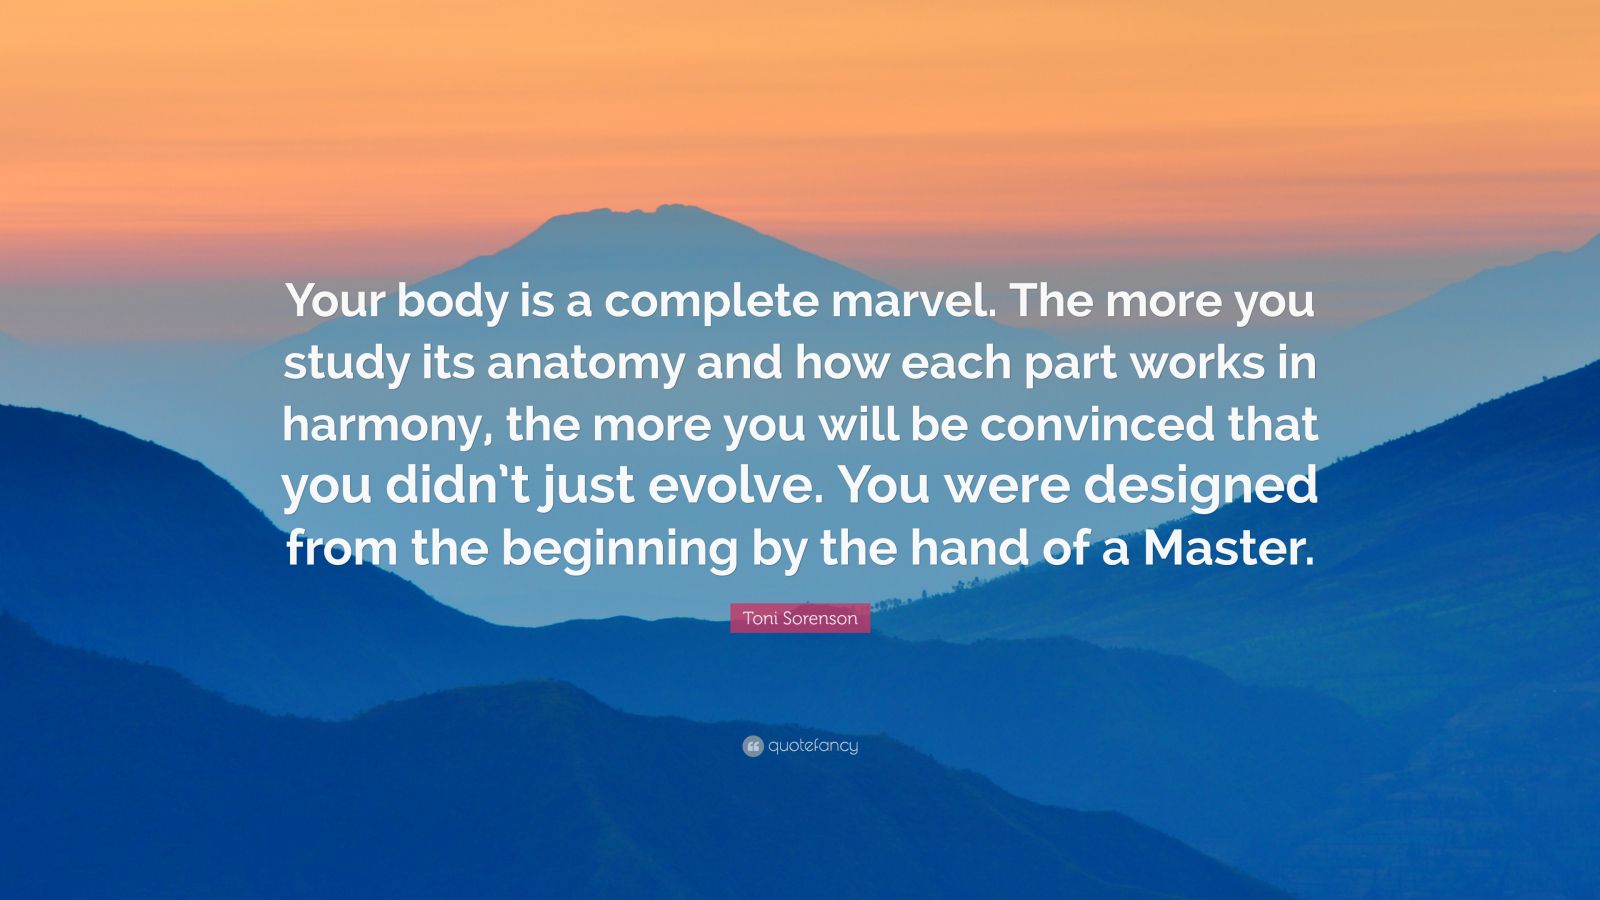 Toni Sorenson Quote: “Your body is a complete marvel. The more you ...